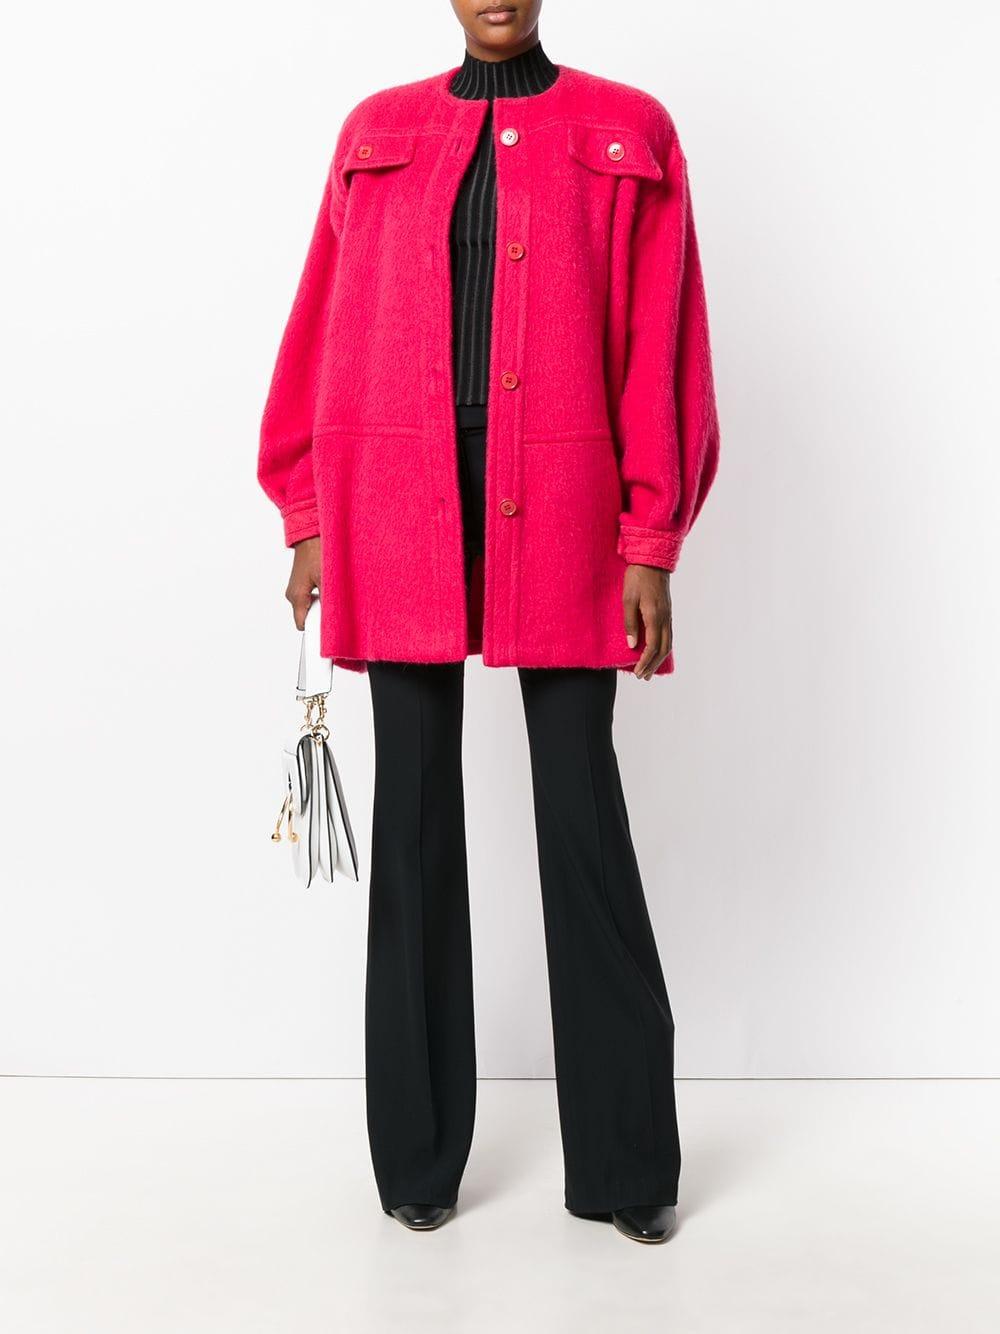 Gianfranco Ferré magenta wool and mohair oversize coat. Crewneck model and front buttoning. Long balloon sleeves, fake flap pockets with button on the chest, two welt pockets with button on the bottom. 
Years: 80s
Made in Italy

Size: 42 IT 
 Flat